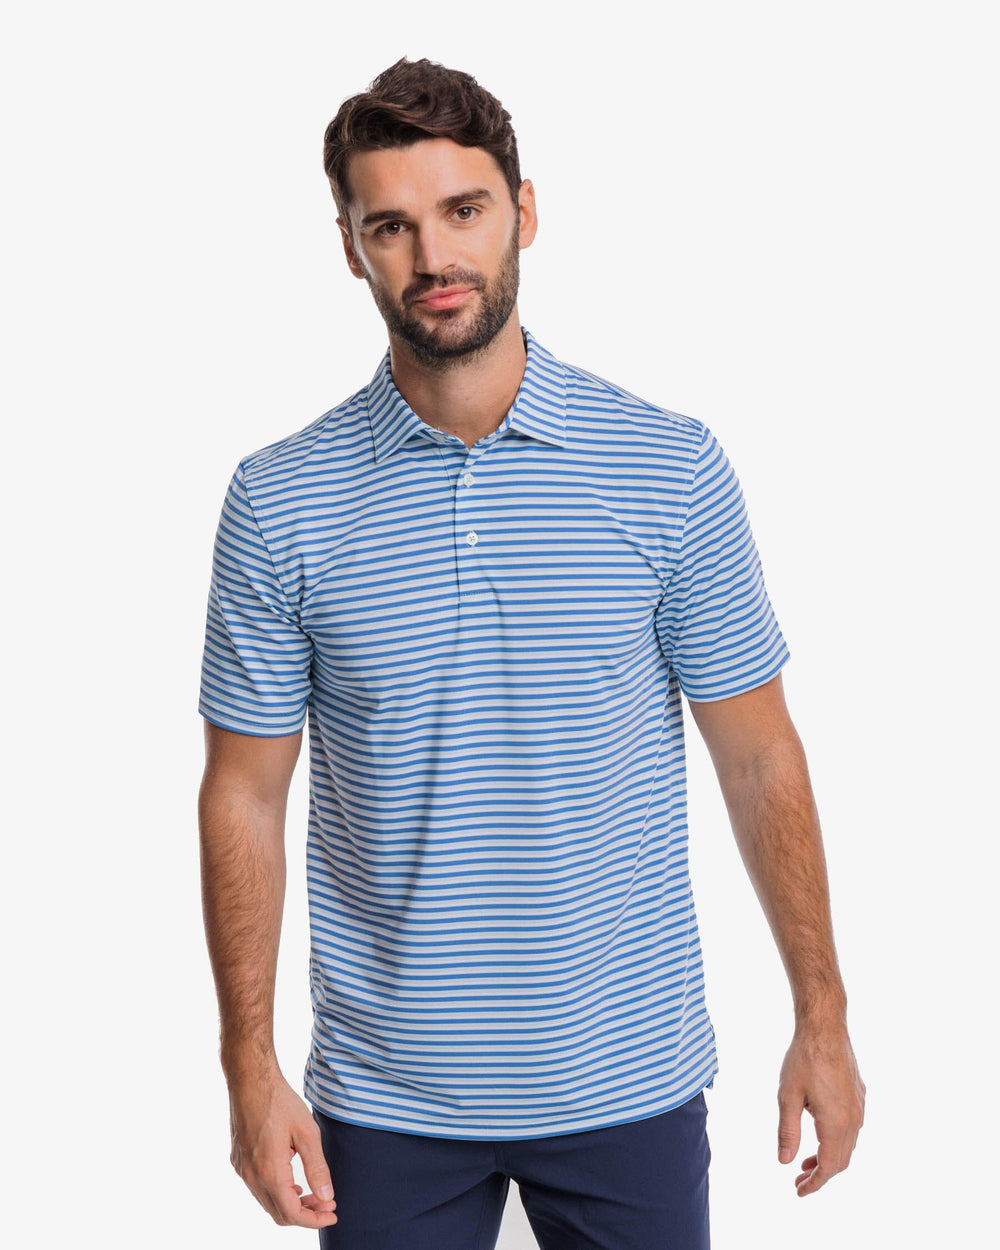 The front view of the Southern Tide Driver Gulf Stripe Polo Shirt by Southern Tide - Atlantic Blue